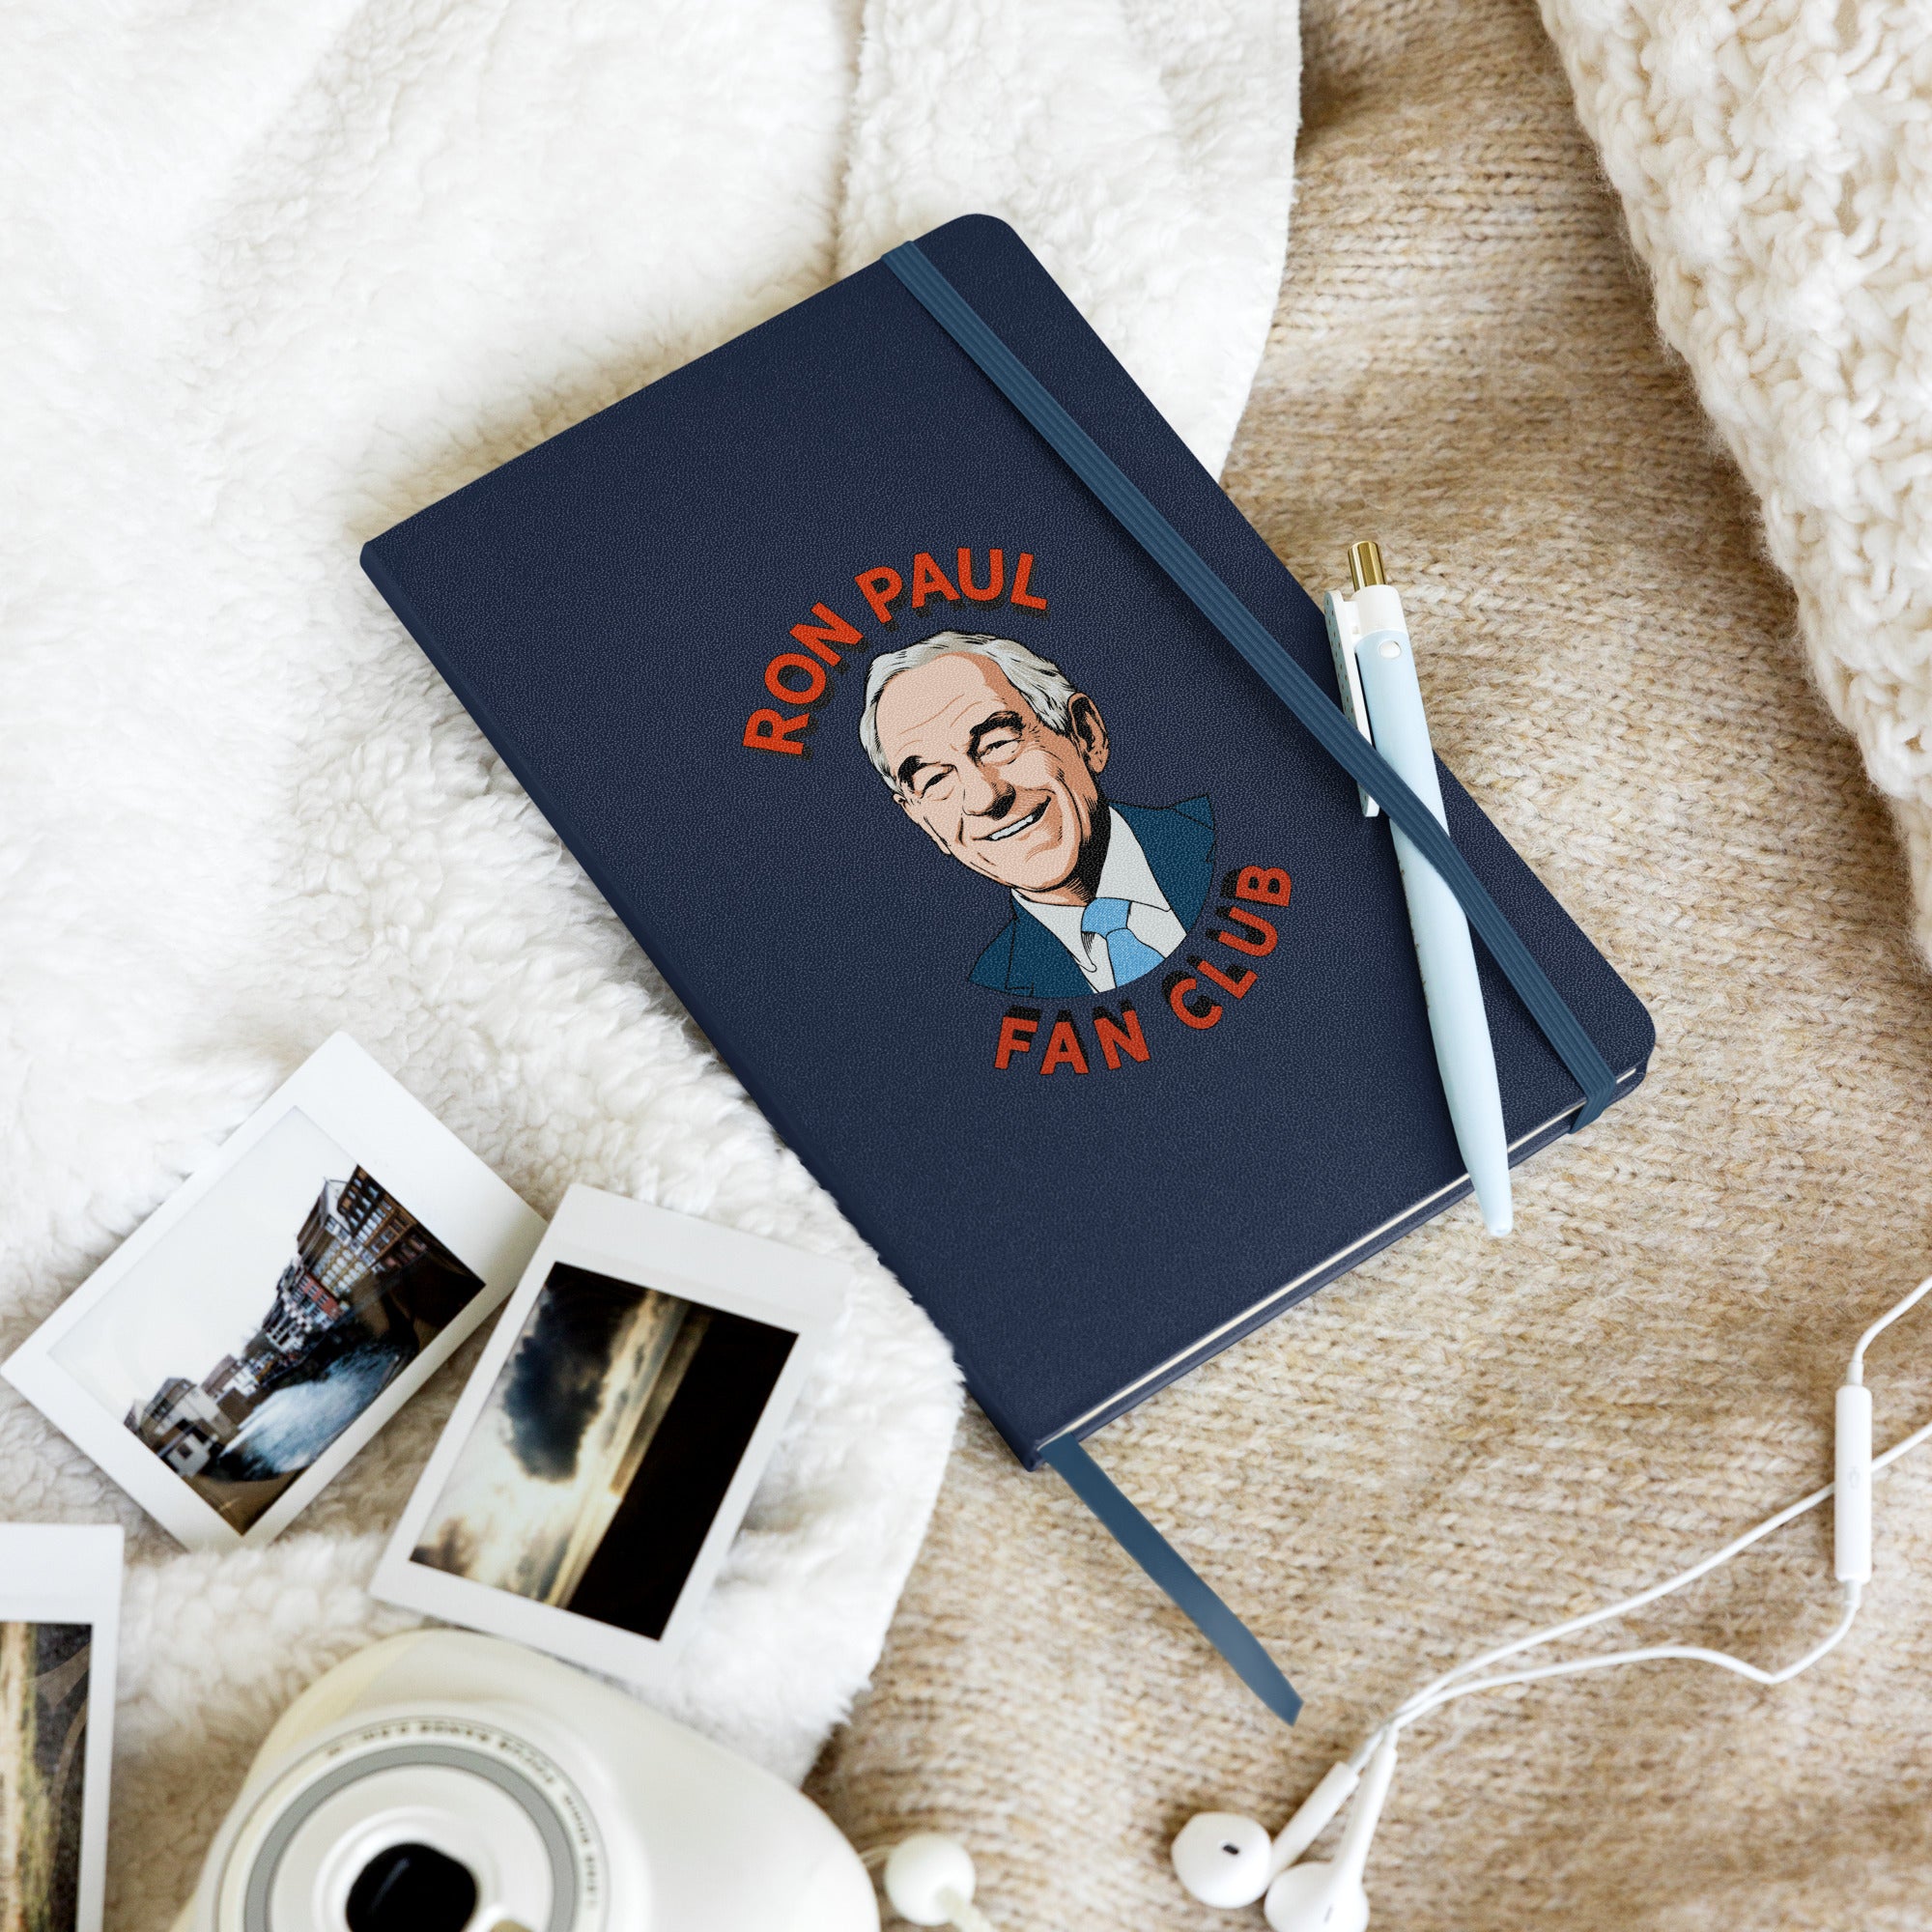 Ron Paul Fan Club Hardcover Bound Notebook